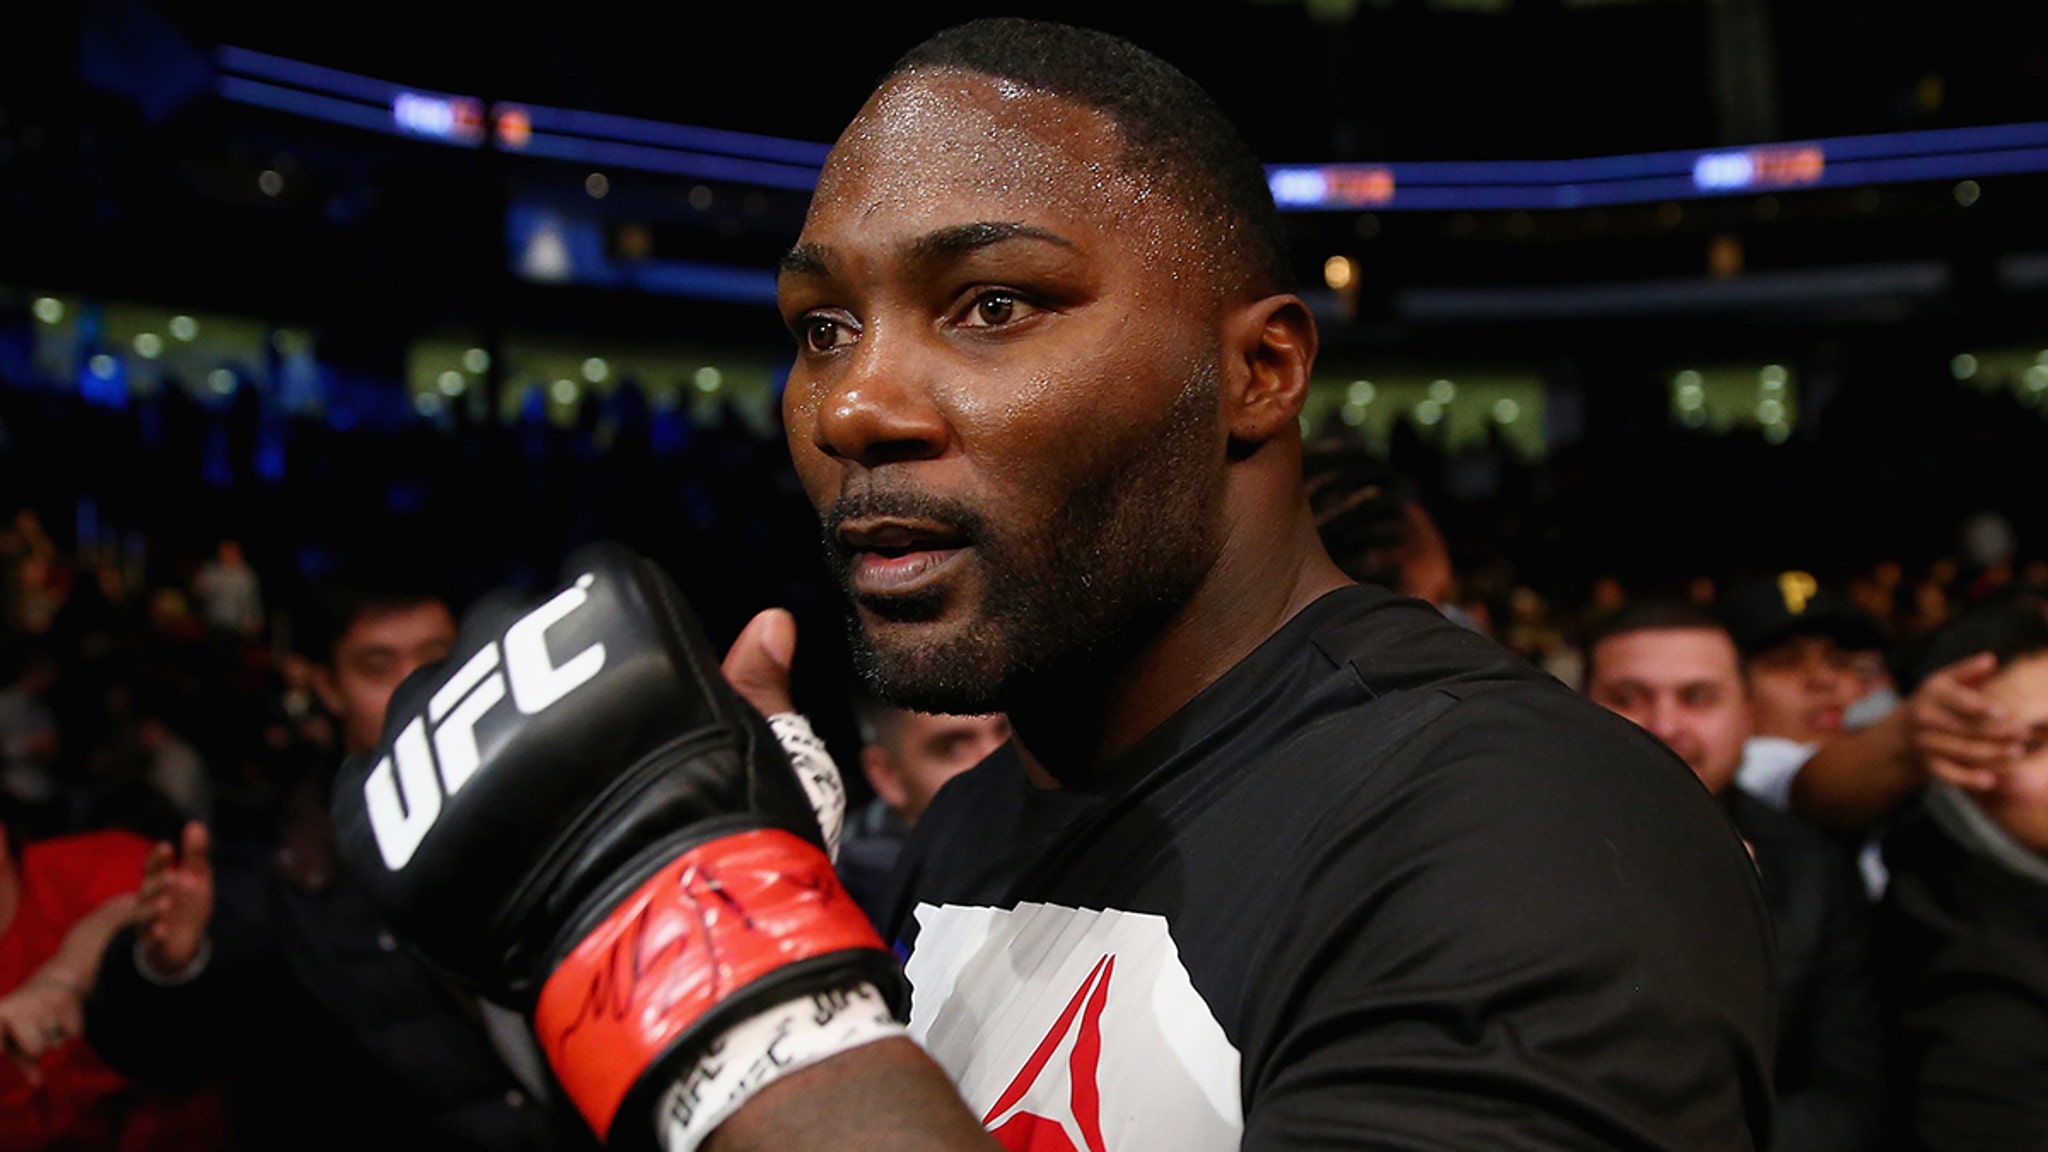 UFC’s Anthony ‘Rumble’ Johnson Dead at 38